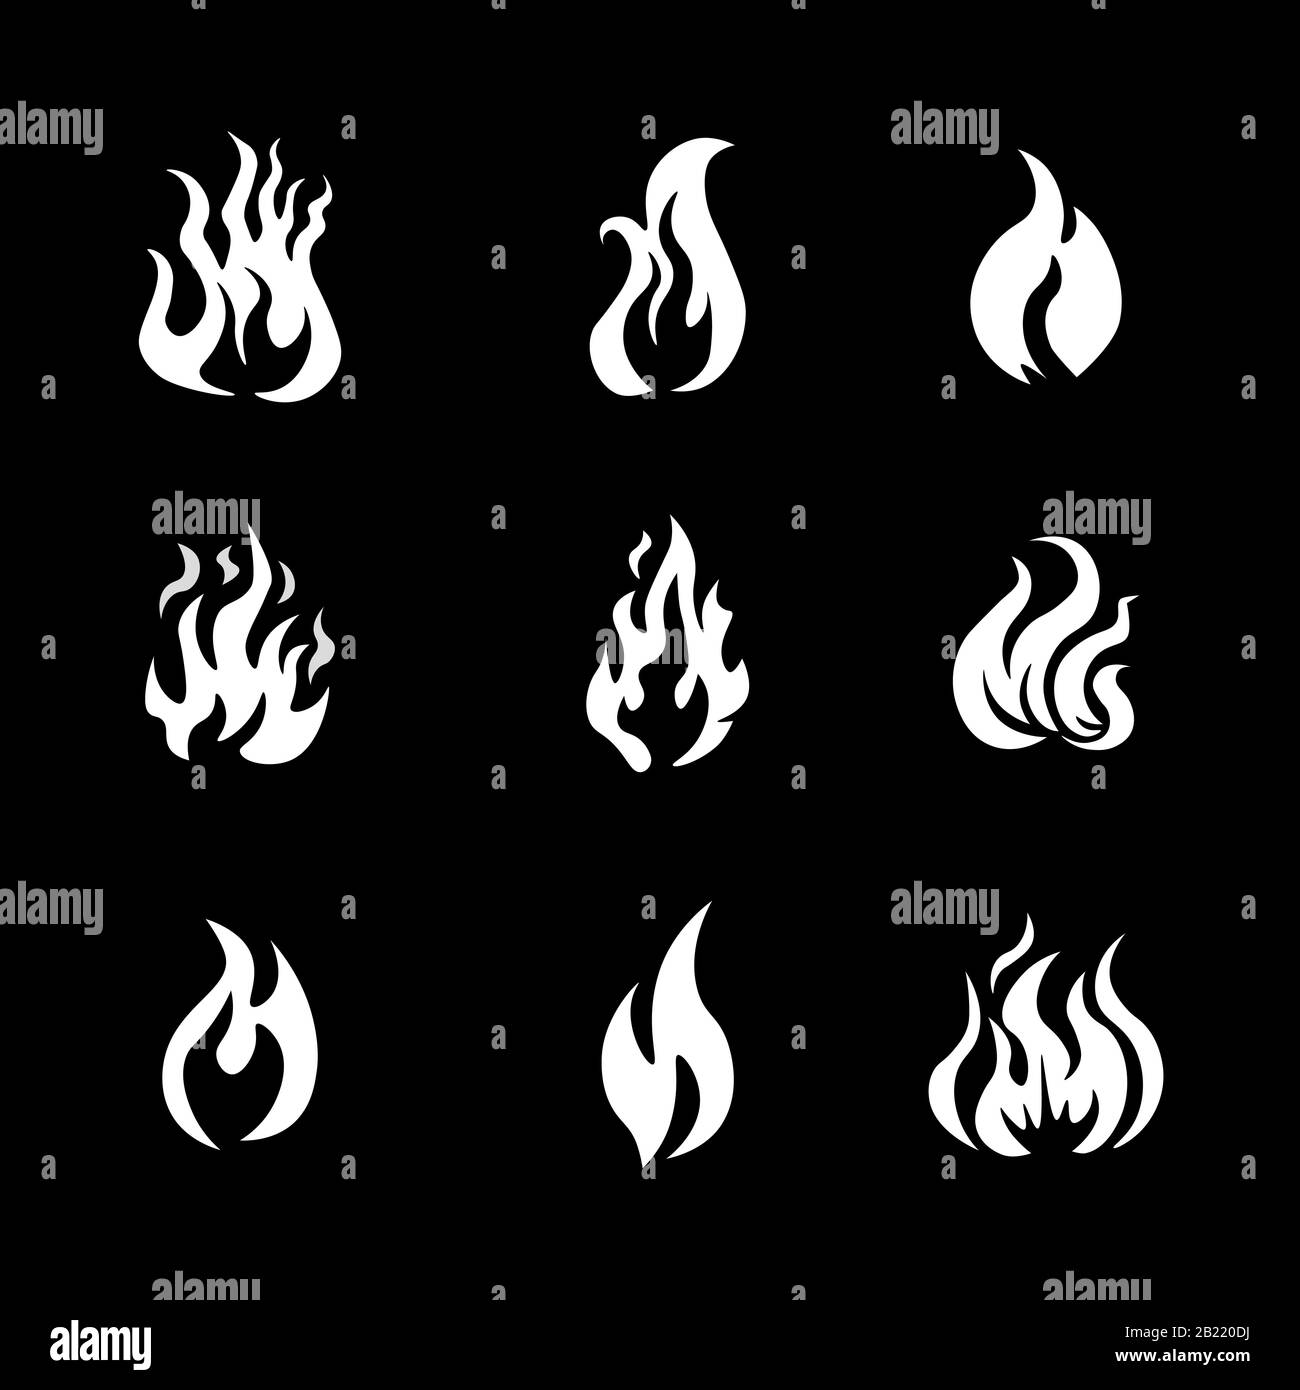 https://c8.alamy.com/comp/2B220DJ/fire-frame-icon-set-illustration-cartoon-flame-elements-white-burn-bounds-blazing-line-vector-images-isolated-on-a-white-background-2B220DJ.jpg